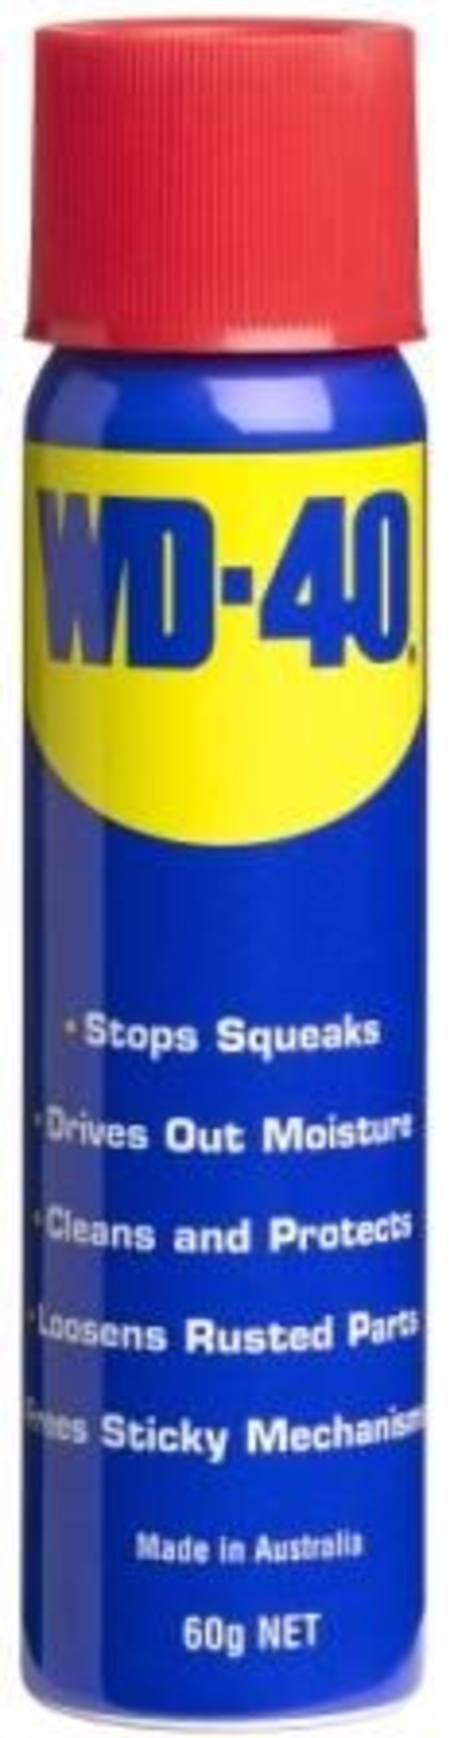 WD-40 LUBRICANT AND PENENTRANT 425g